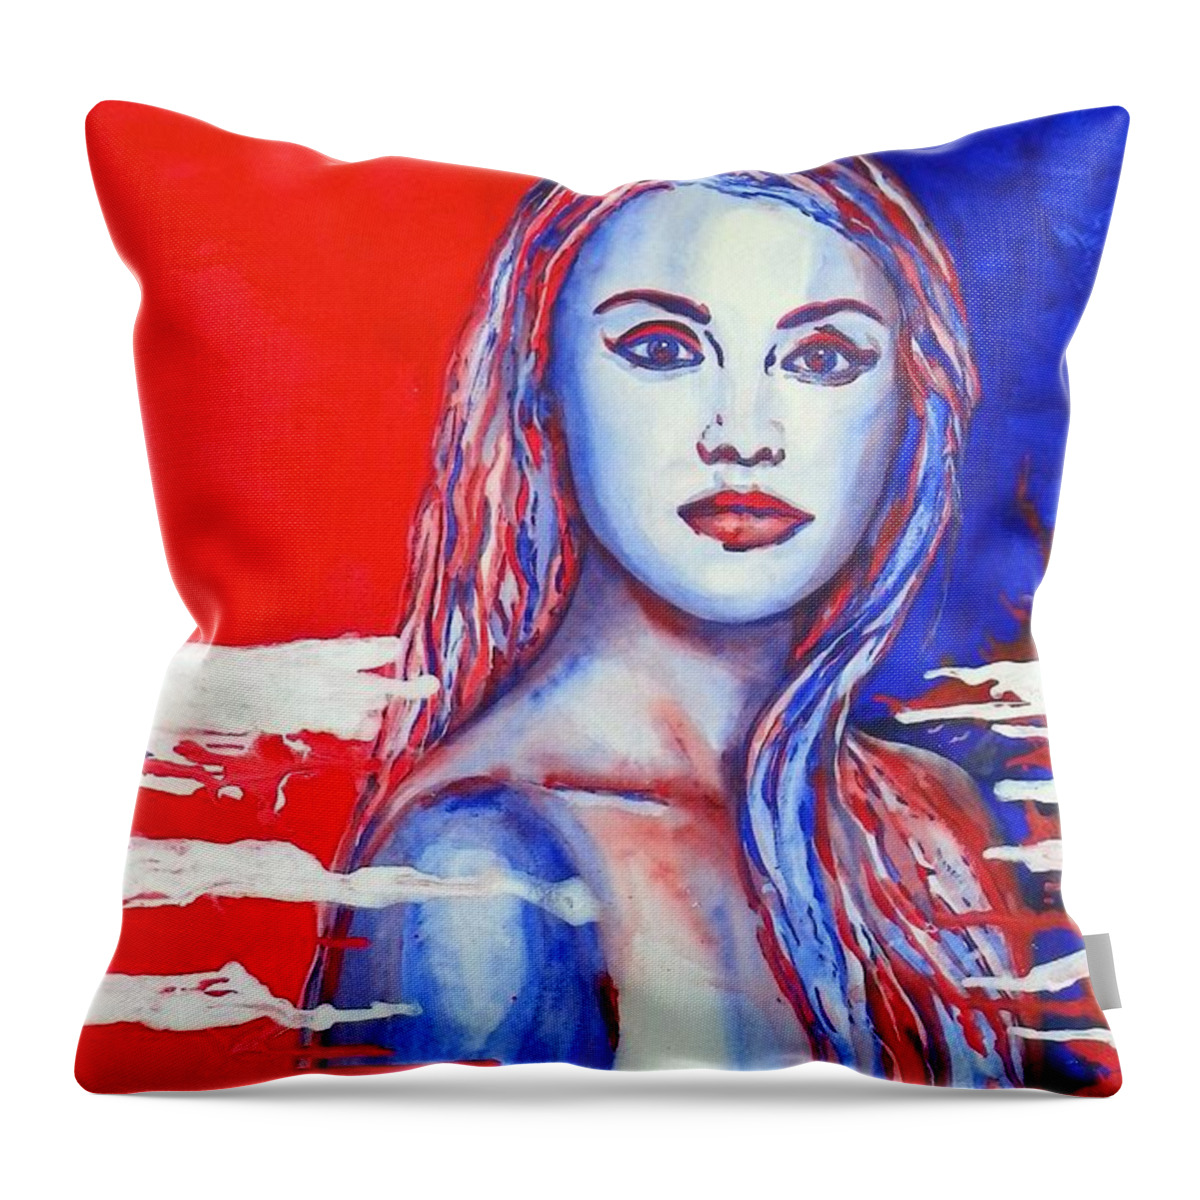 America's Freedom Throw Pillow featuring the painting Liberty American Girl by Anna Ruzsan